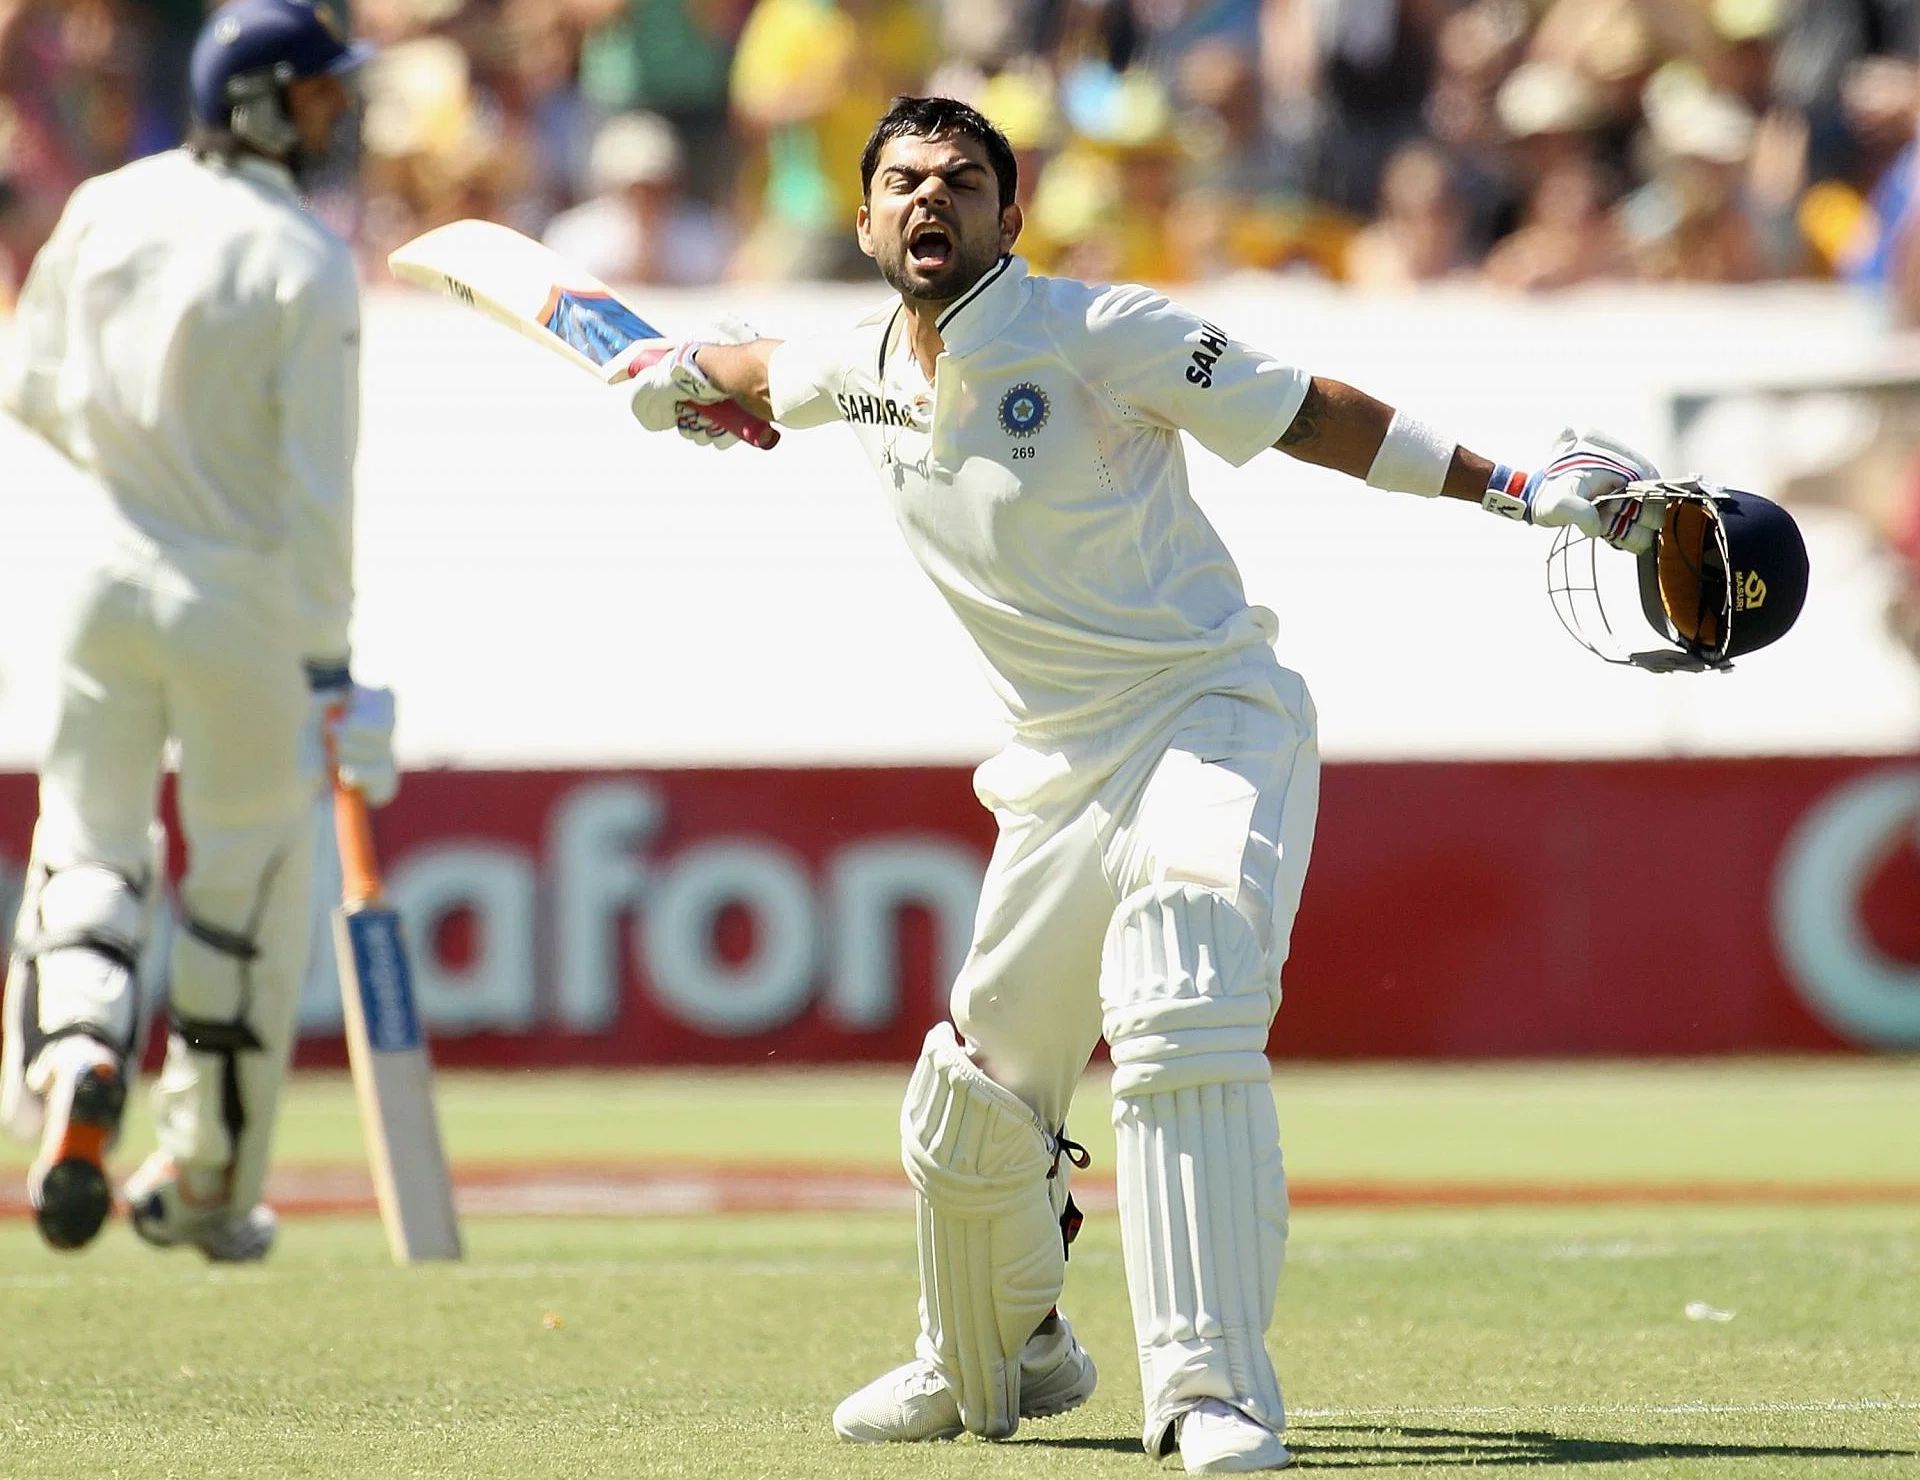 Like Tendulkar before him, Kohli also loves playing against Australia. He has come up with some brilliant performances against the Aussies. It&rsquo;s no surprise then that his first Test ton also came against his favorite opponent in Adelaide. He scored a fine 116 in January 2012 even as India went down by 298 runs. (Pic: Getty Images)